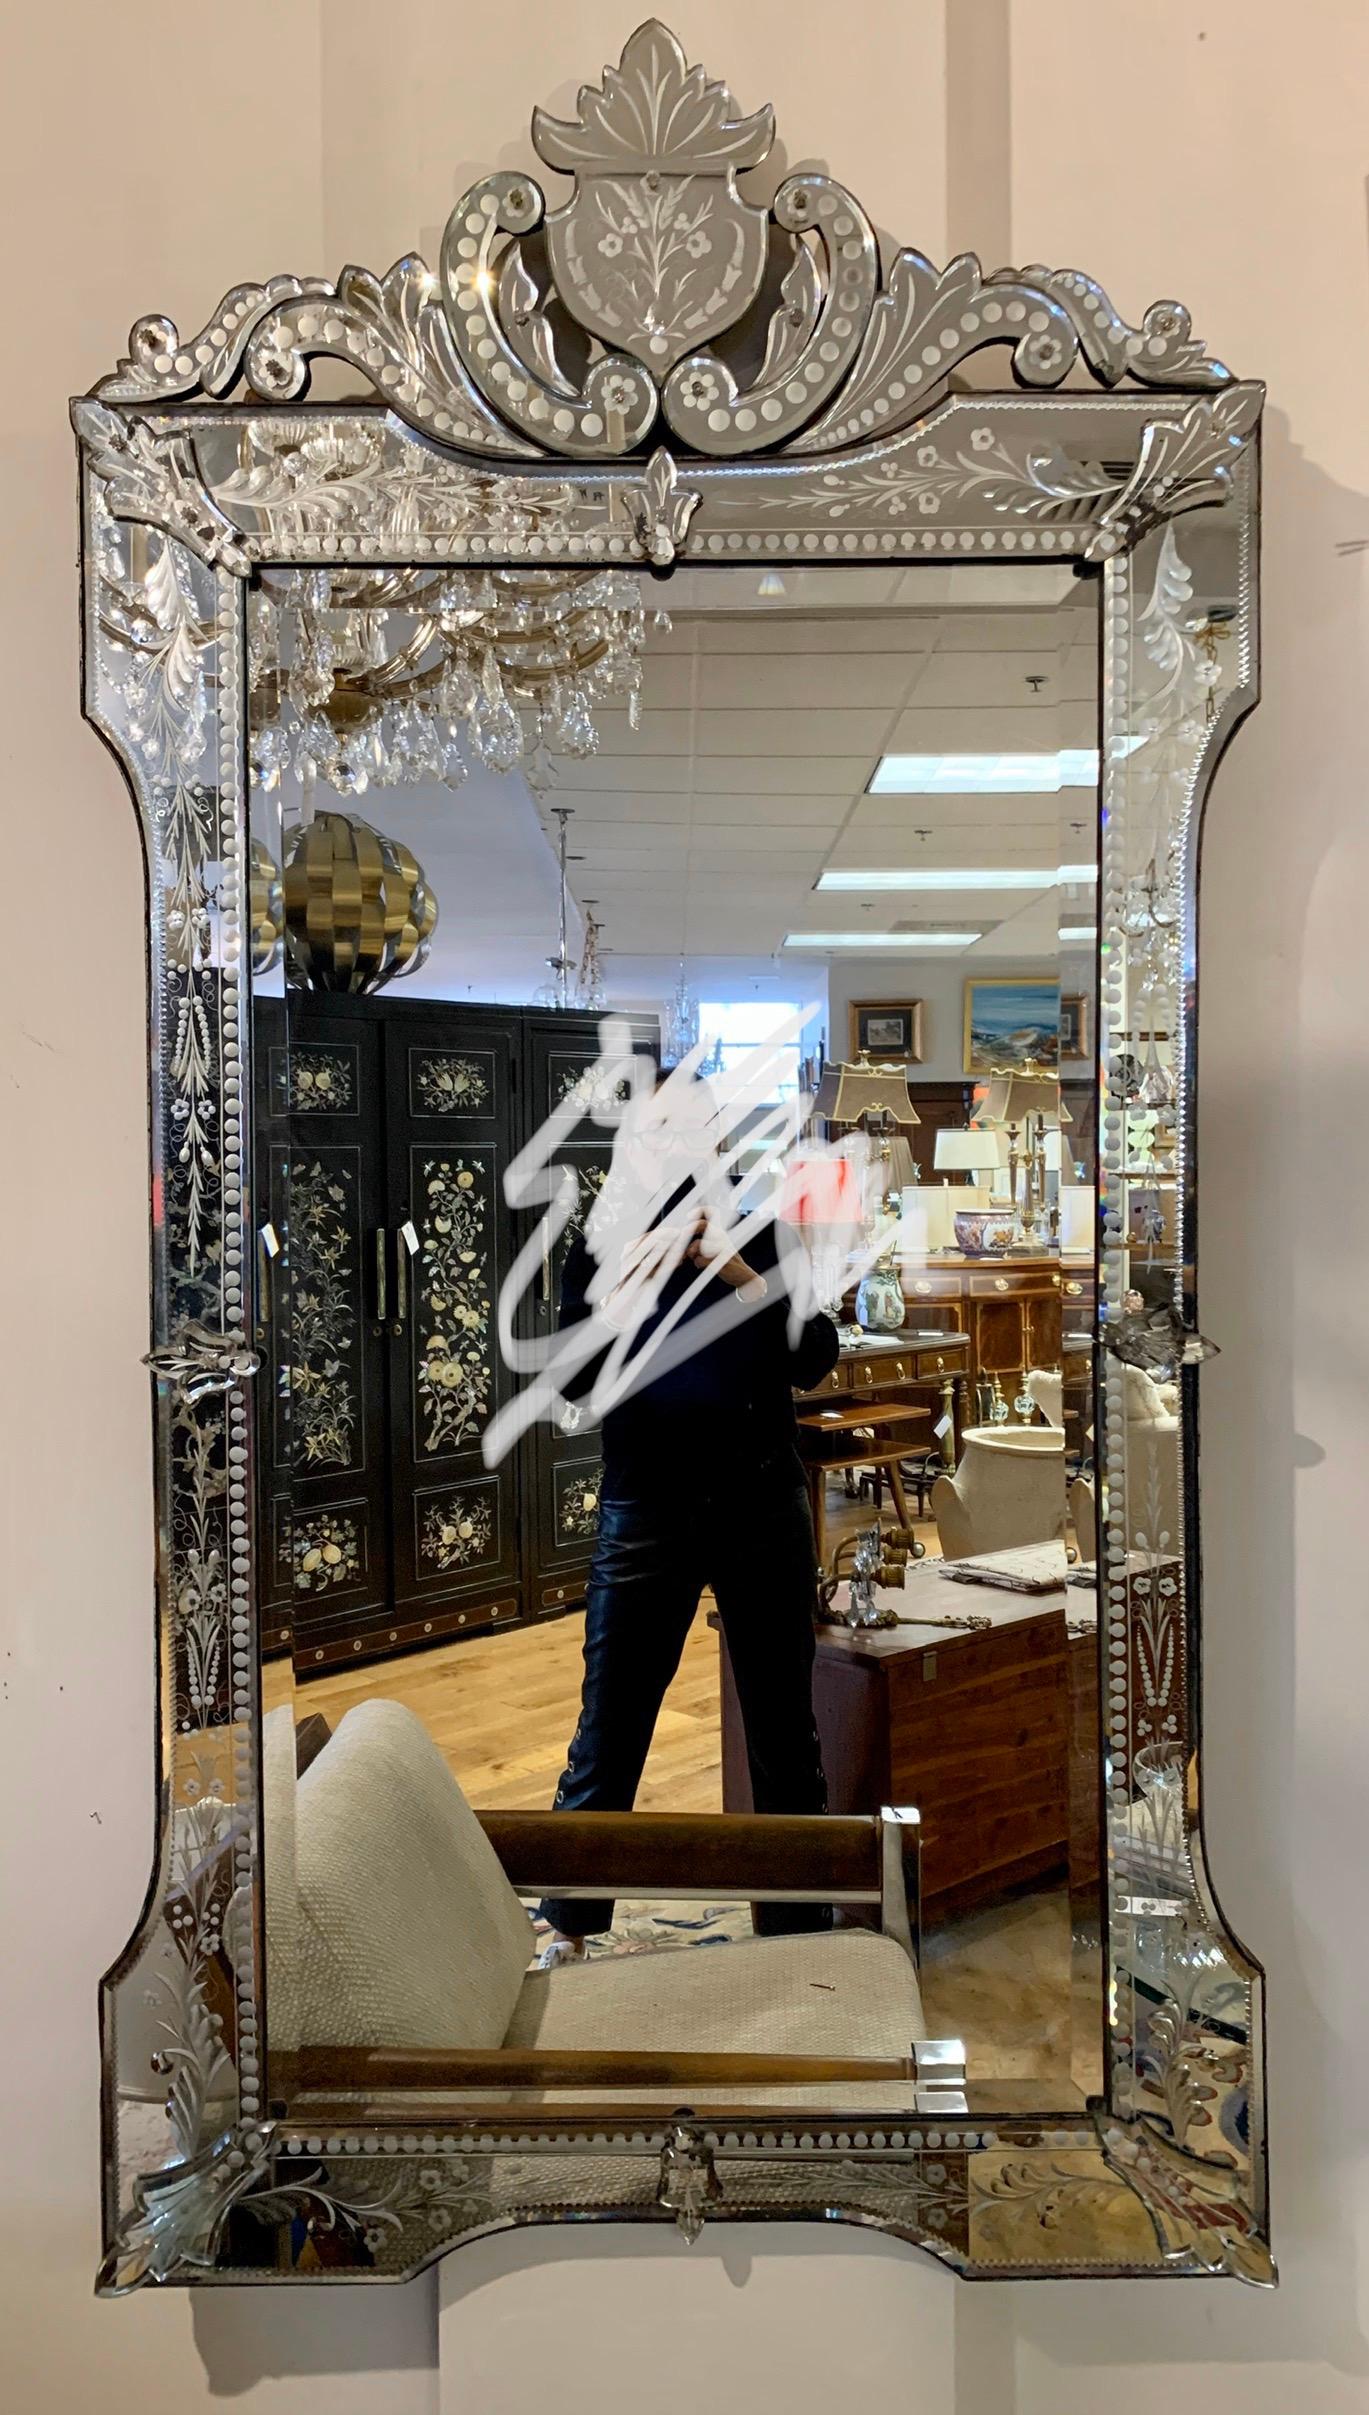 Extra large rectangular Venetian mirror, circa 1890-1899. Topped by elaborate pediment. Great condition with only minor losses to its silvered mirror backing, see all pictures. The biggest Venetian mirror you may ever see, it is 66